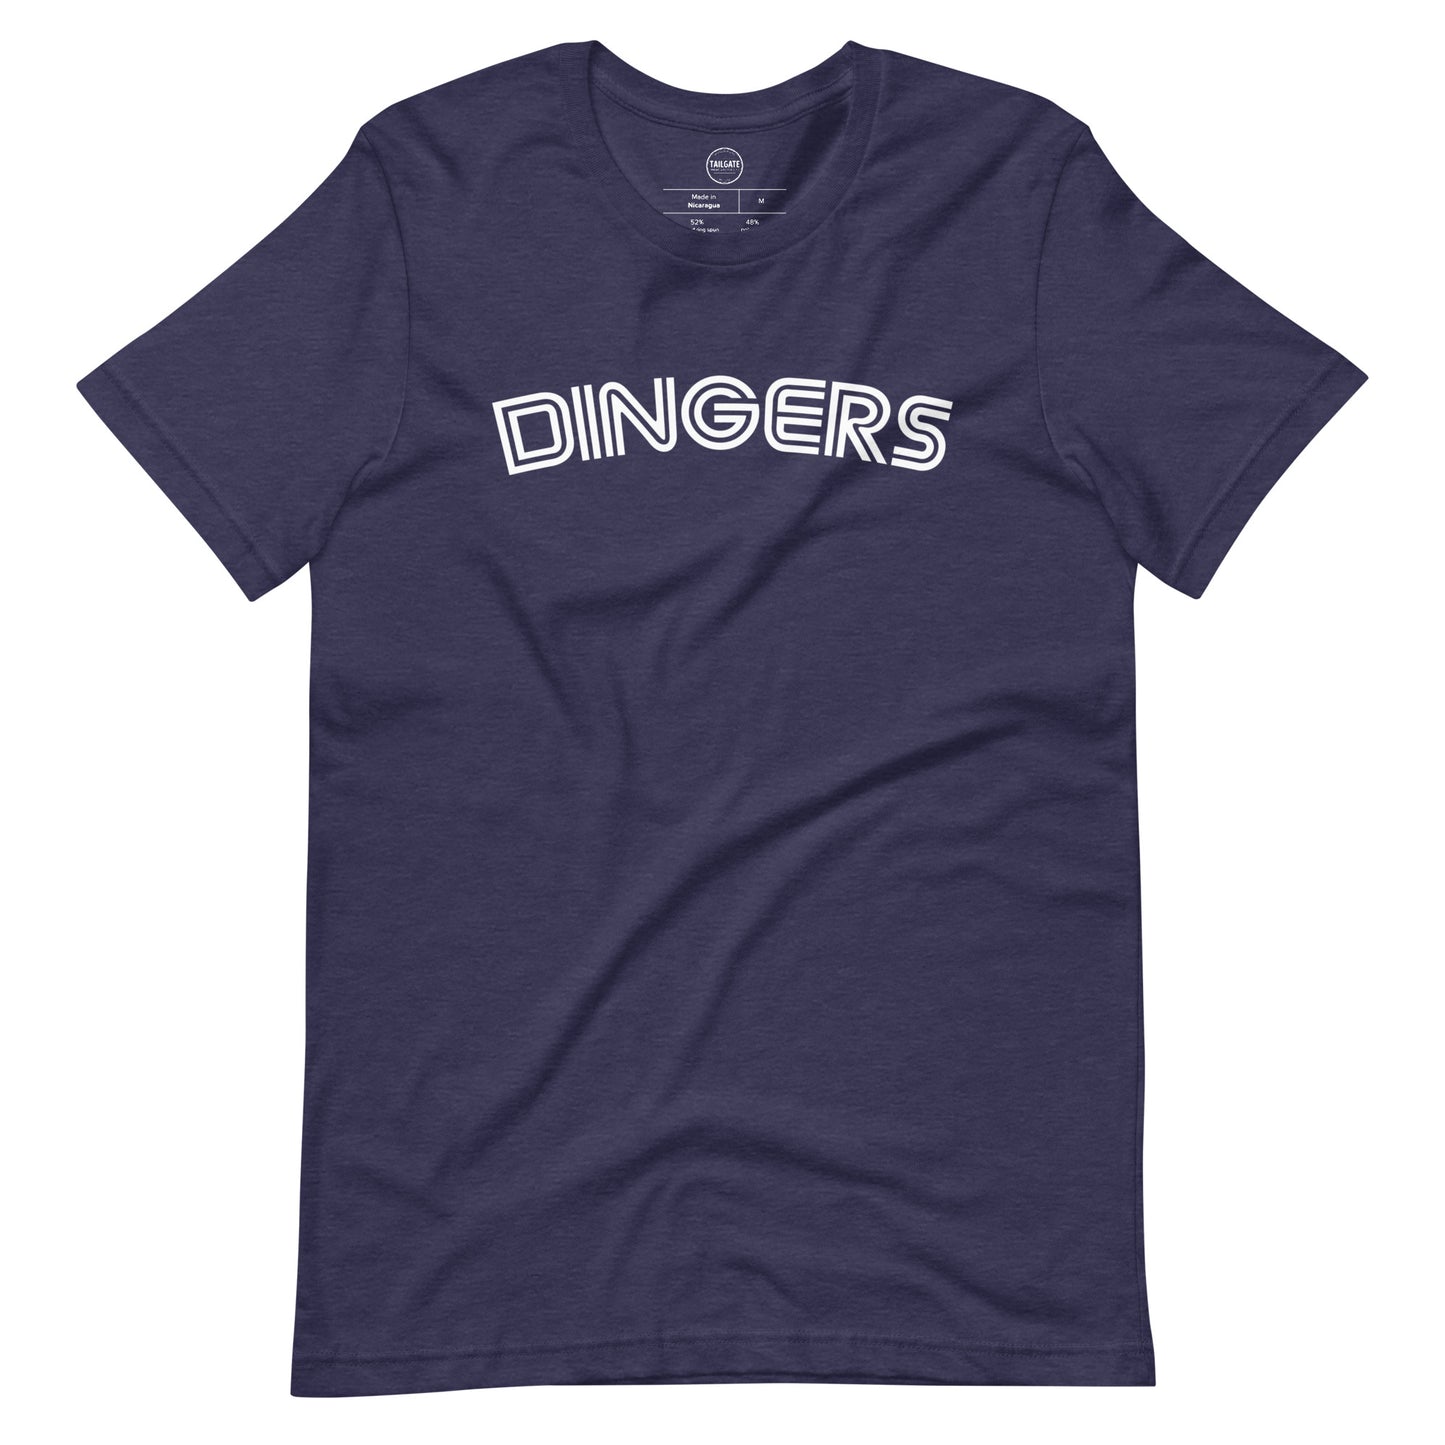 This image details the graphic design of the word "dingers" in a font similar to the Toronto Blue Jays. The font is in white and the tee is navy blue. This design is exclusive to tailgate mercantile and available only online.